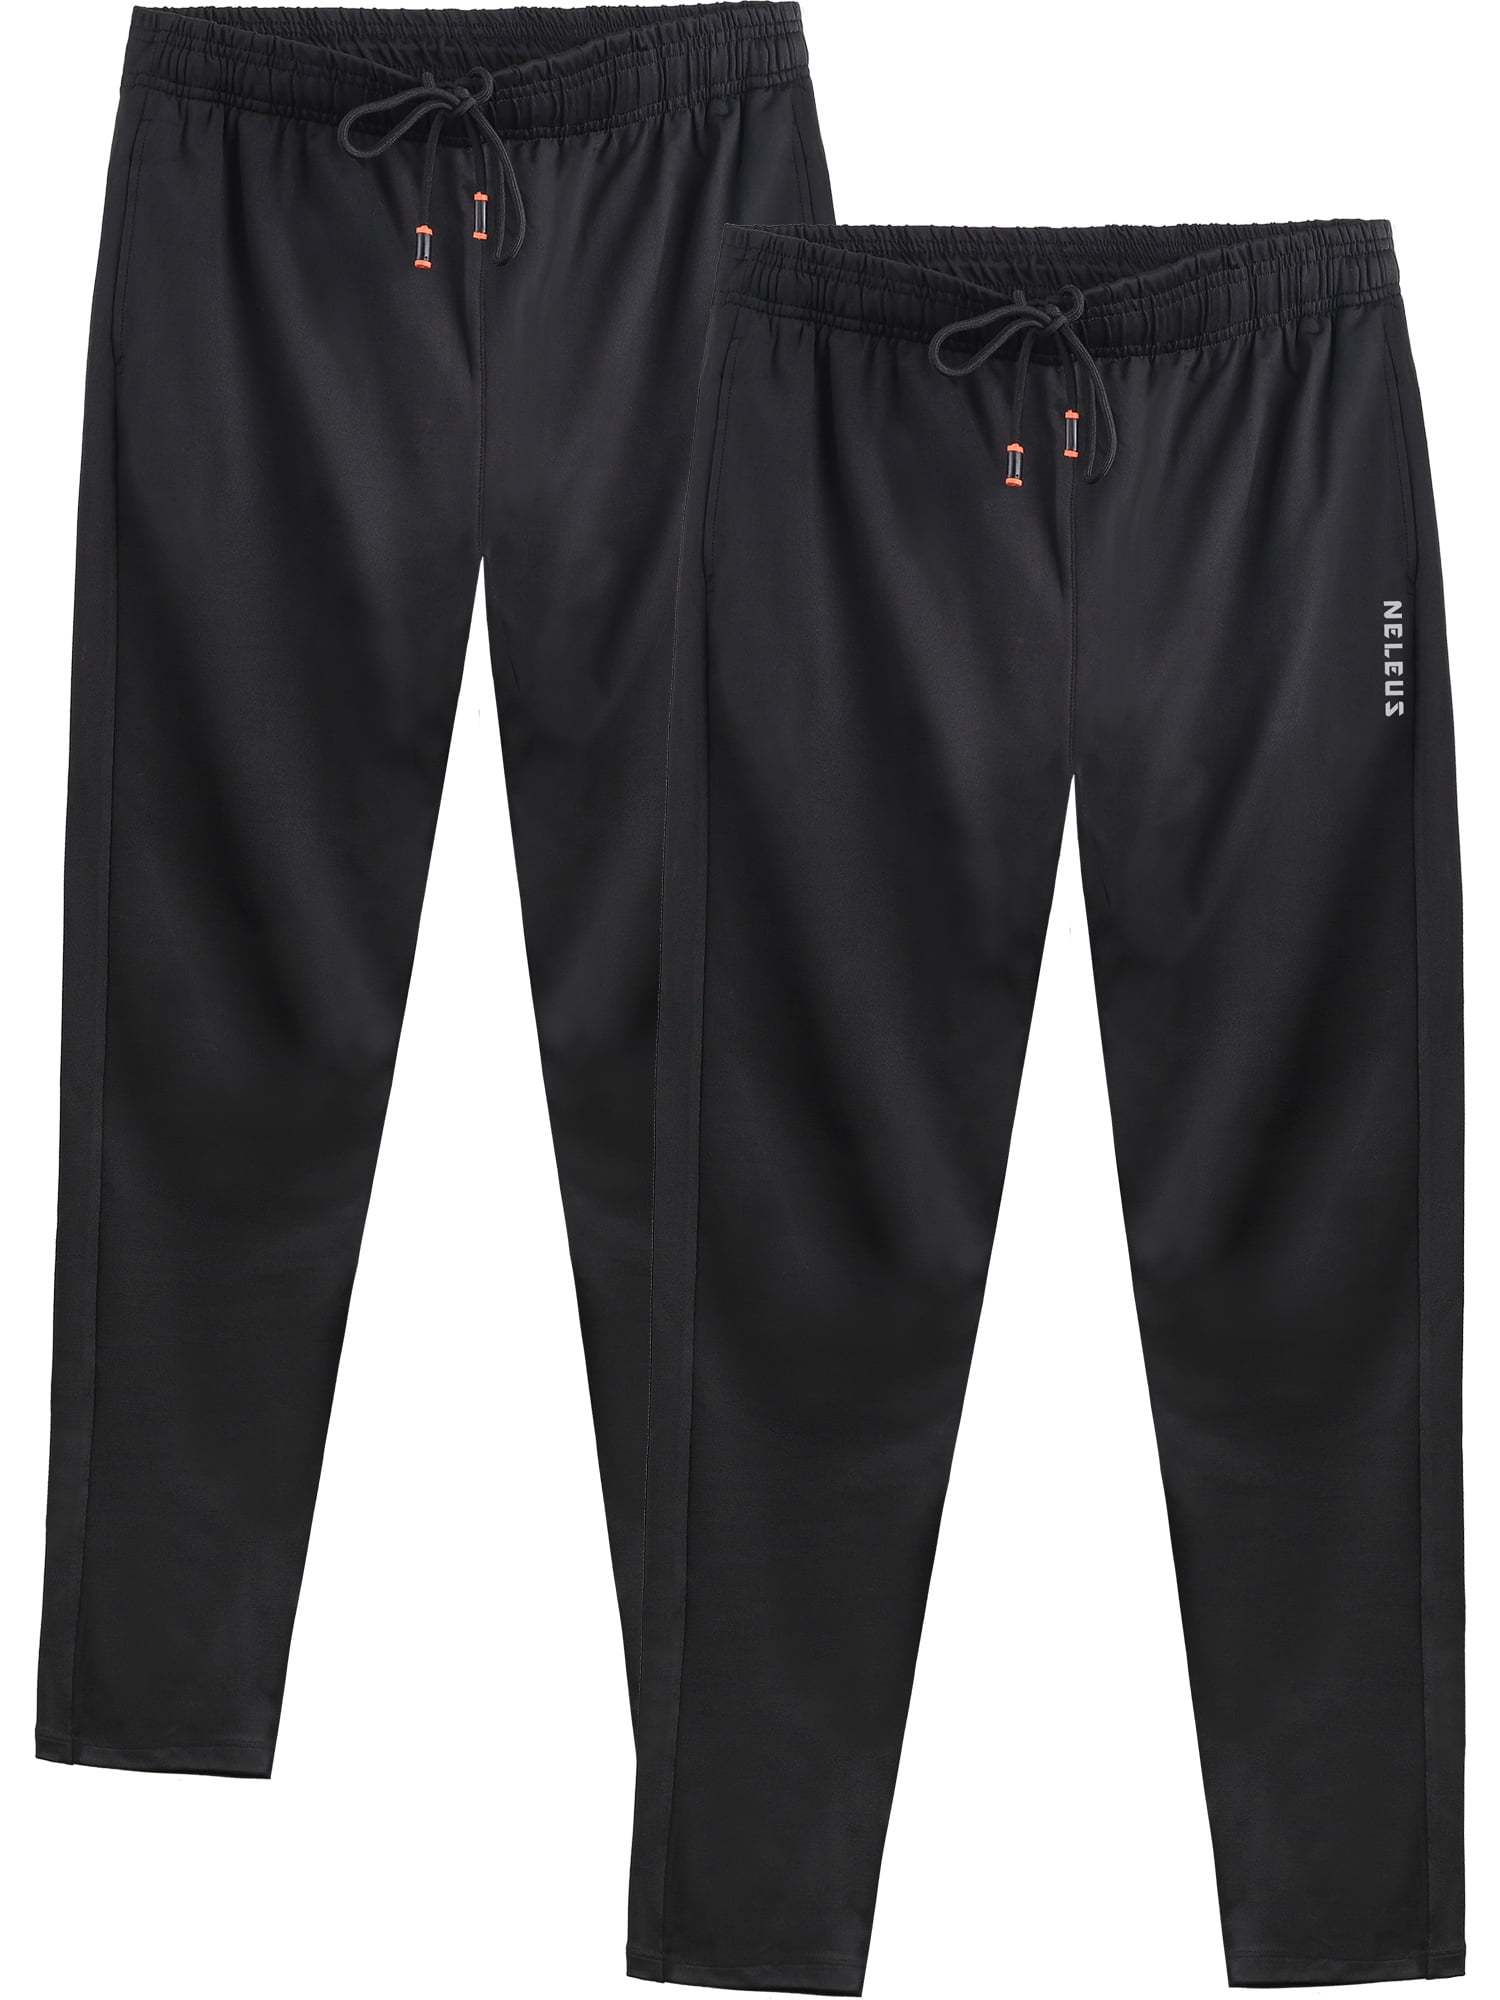 NELEUS Men's Workout Athletic Pants Running Sweatpants With Pockets ...